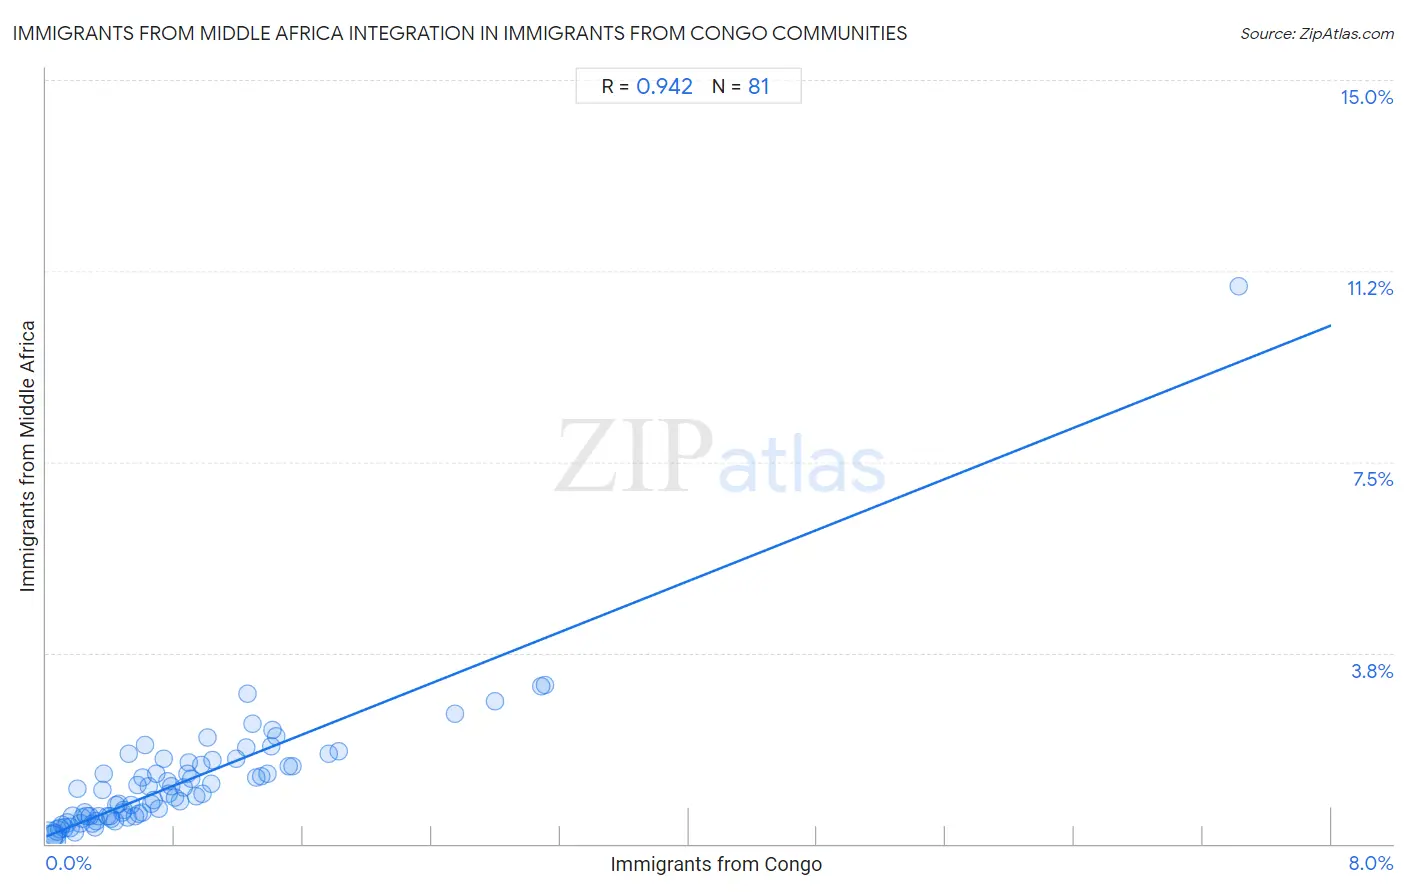 Immigrants from Congo Integration in Immigrants from Middle Africa Communities